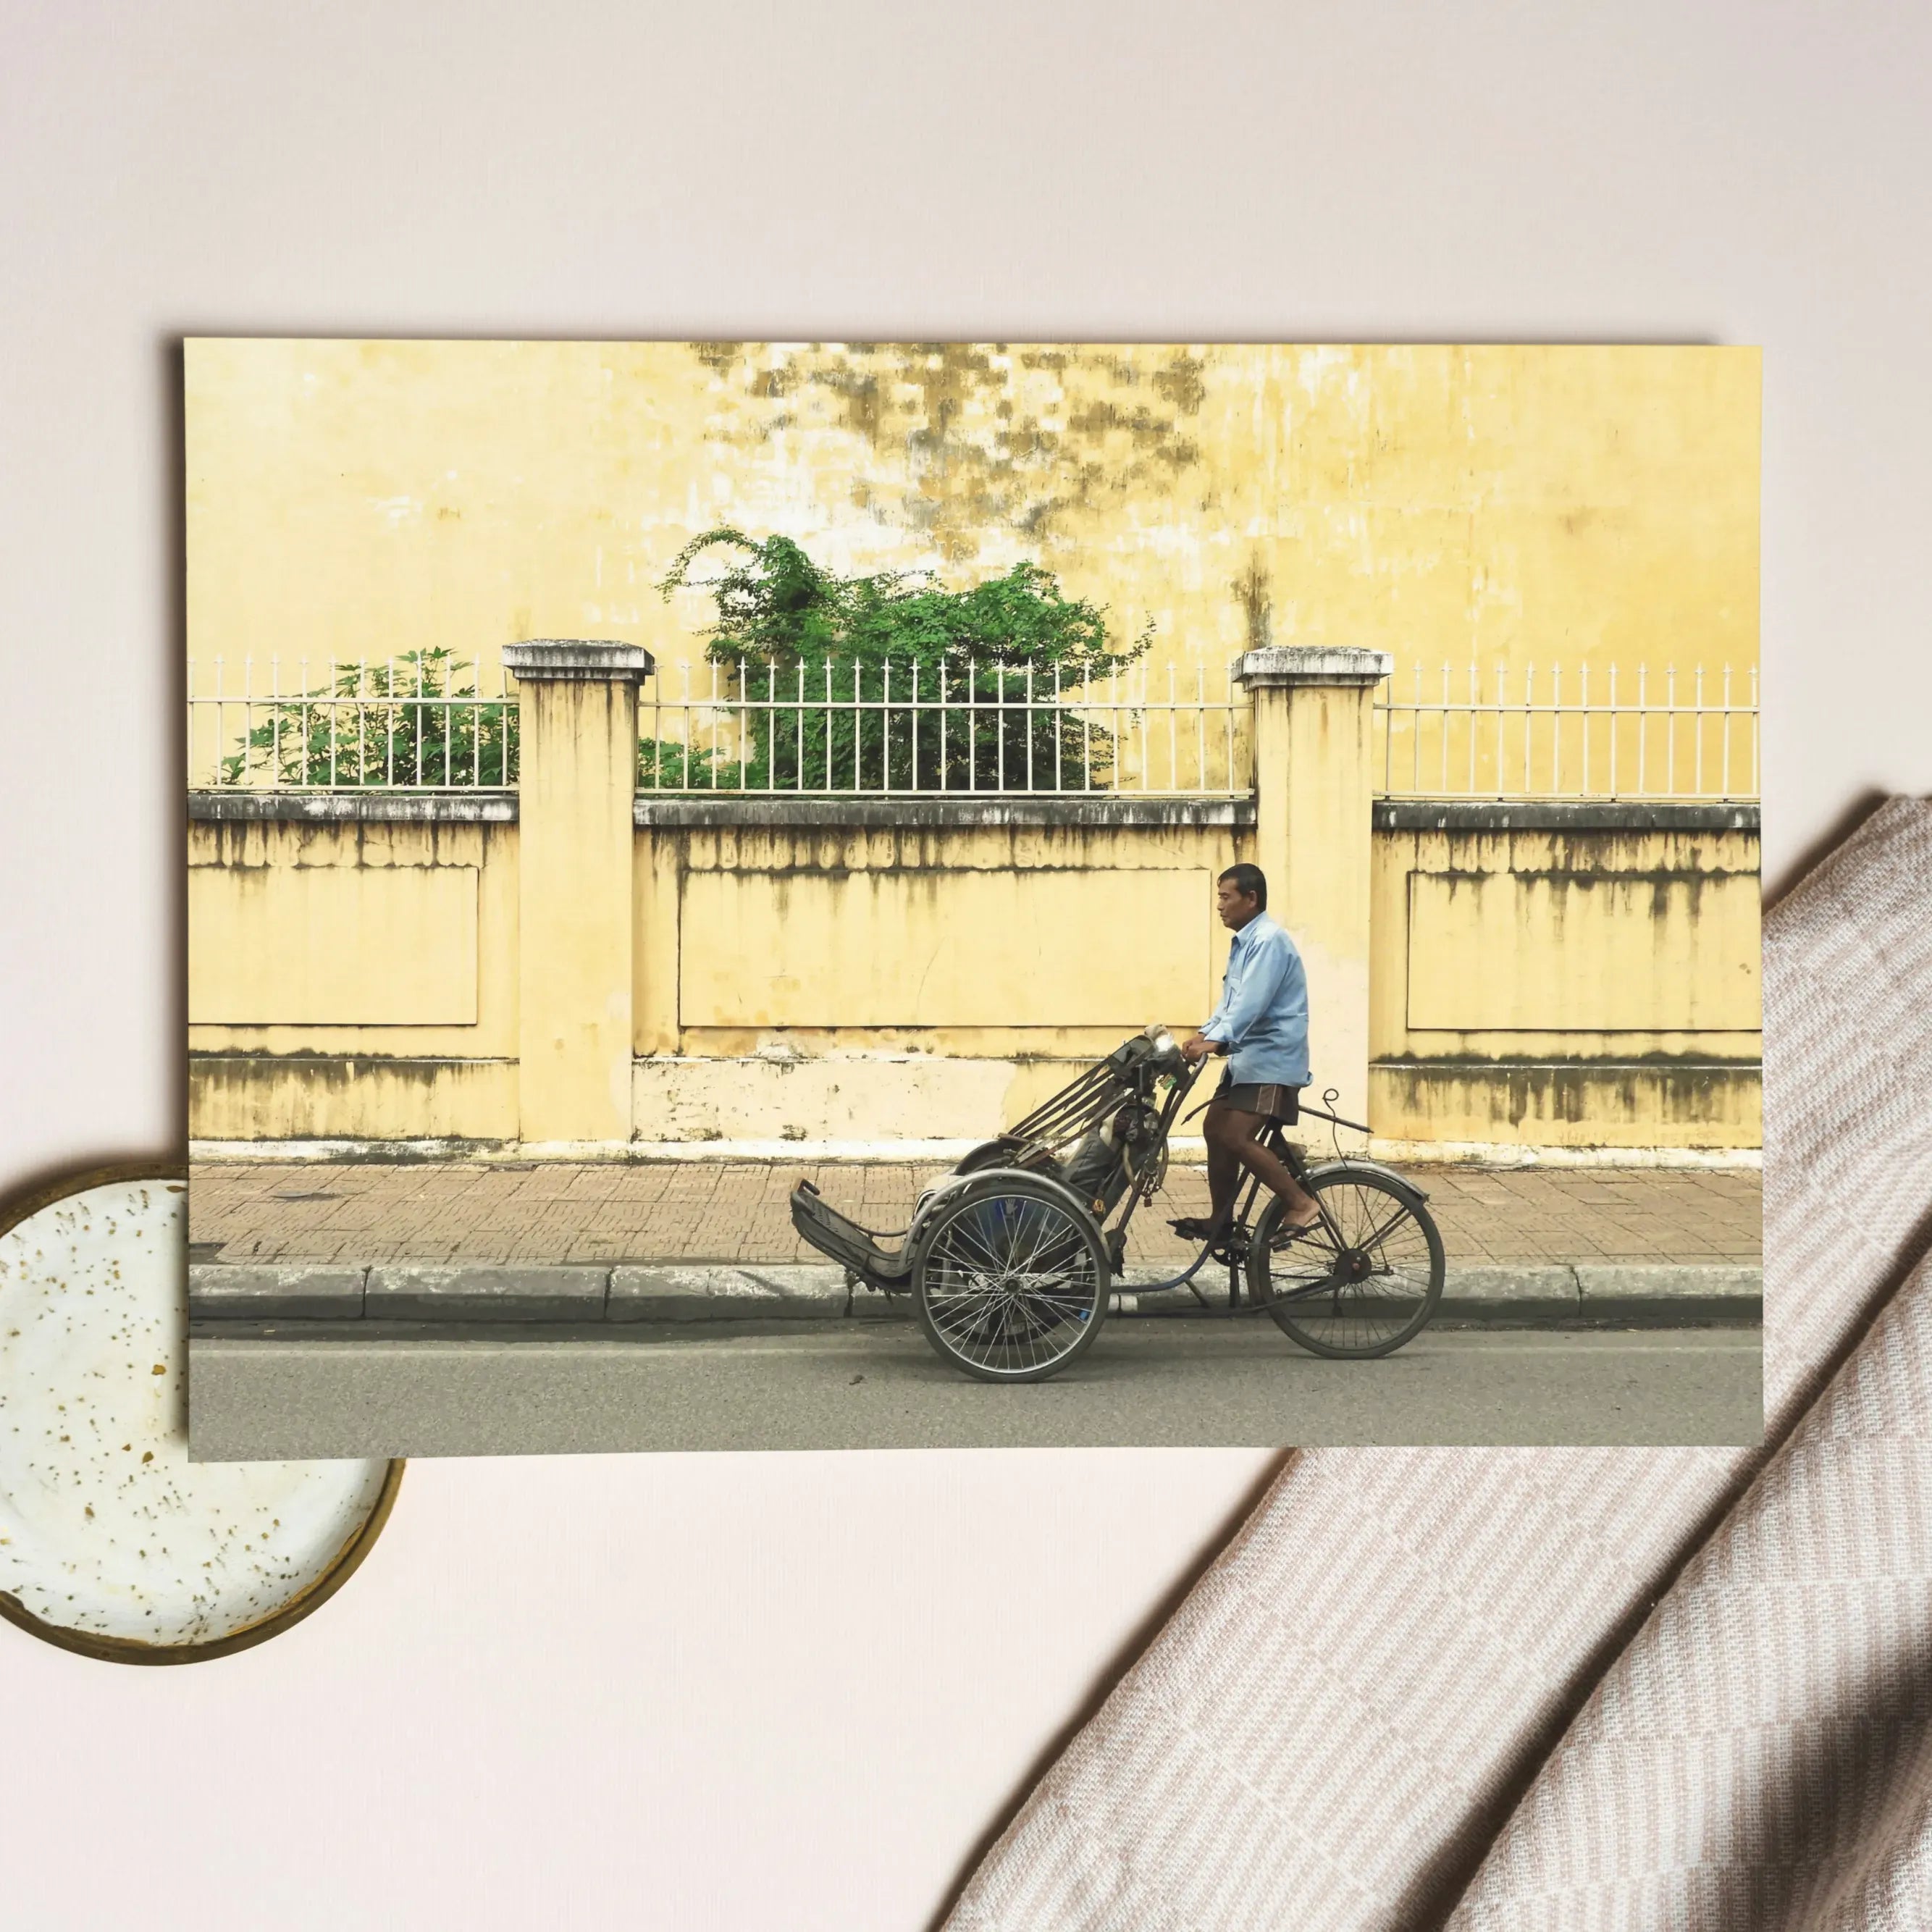 Easy Rider Greeting Card - Phnom Penh Photography - Greeting & Note Cards - Aesthetic Art